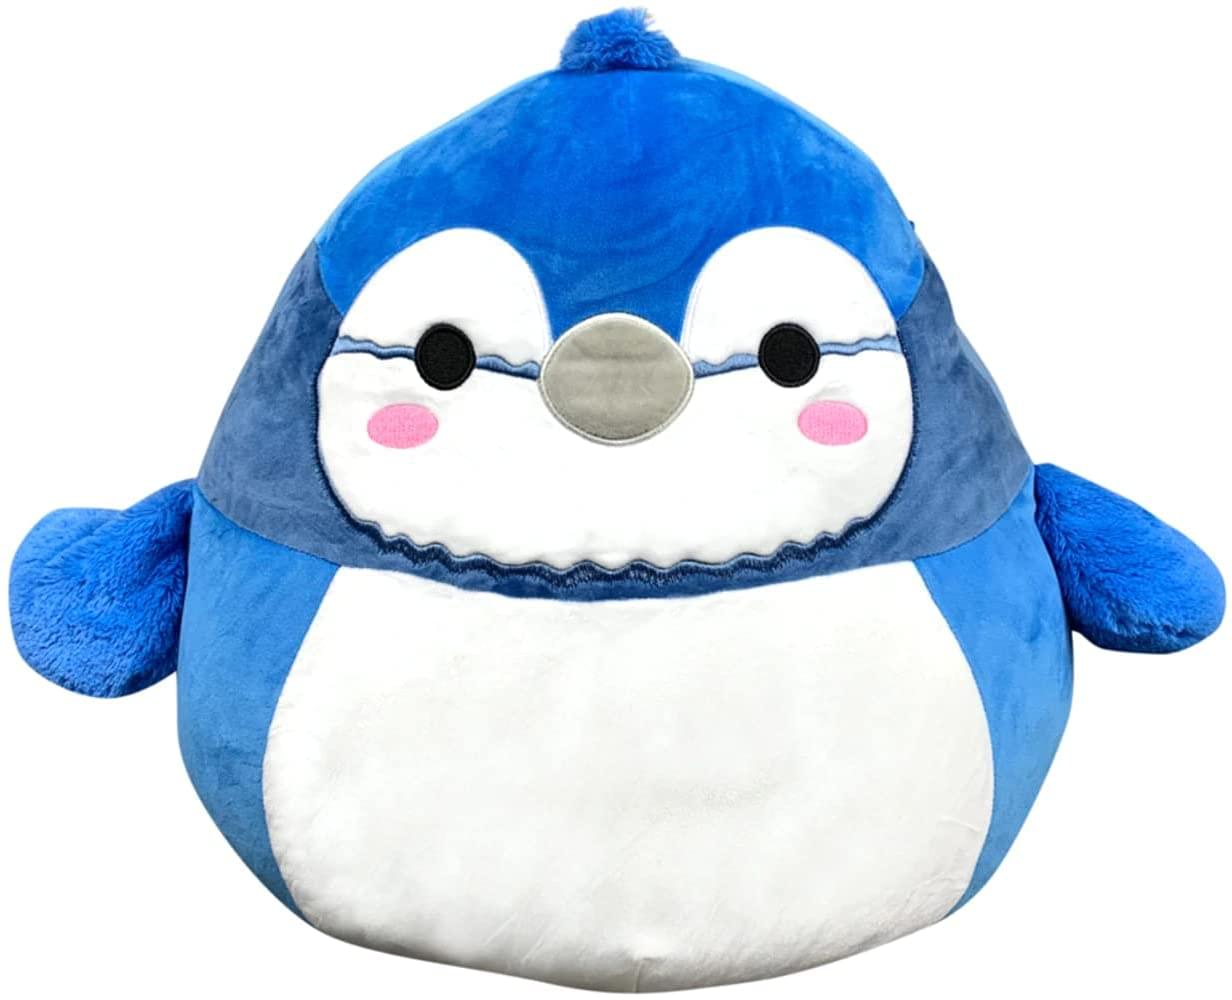 Squishmallow 5 Inch Mini Animal Plush | Babs the Bluejay